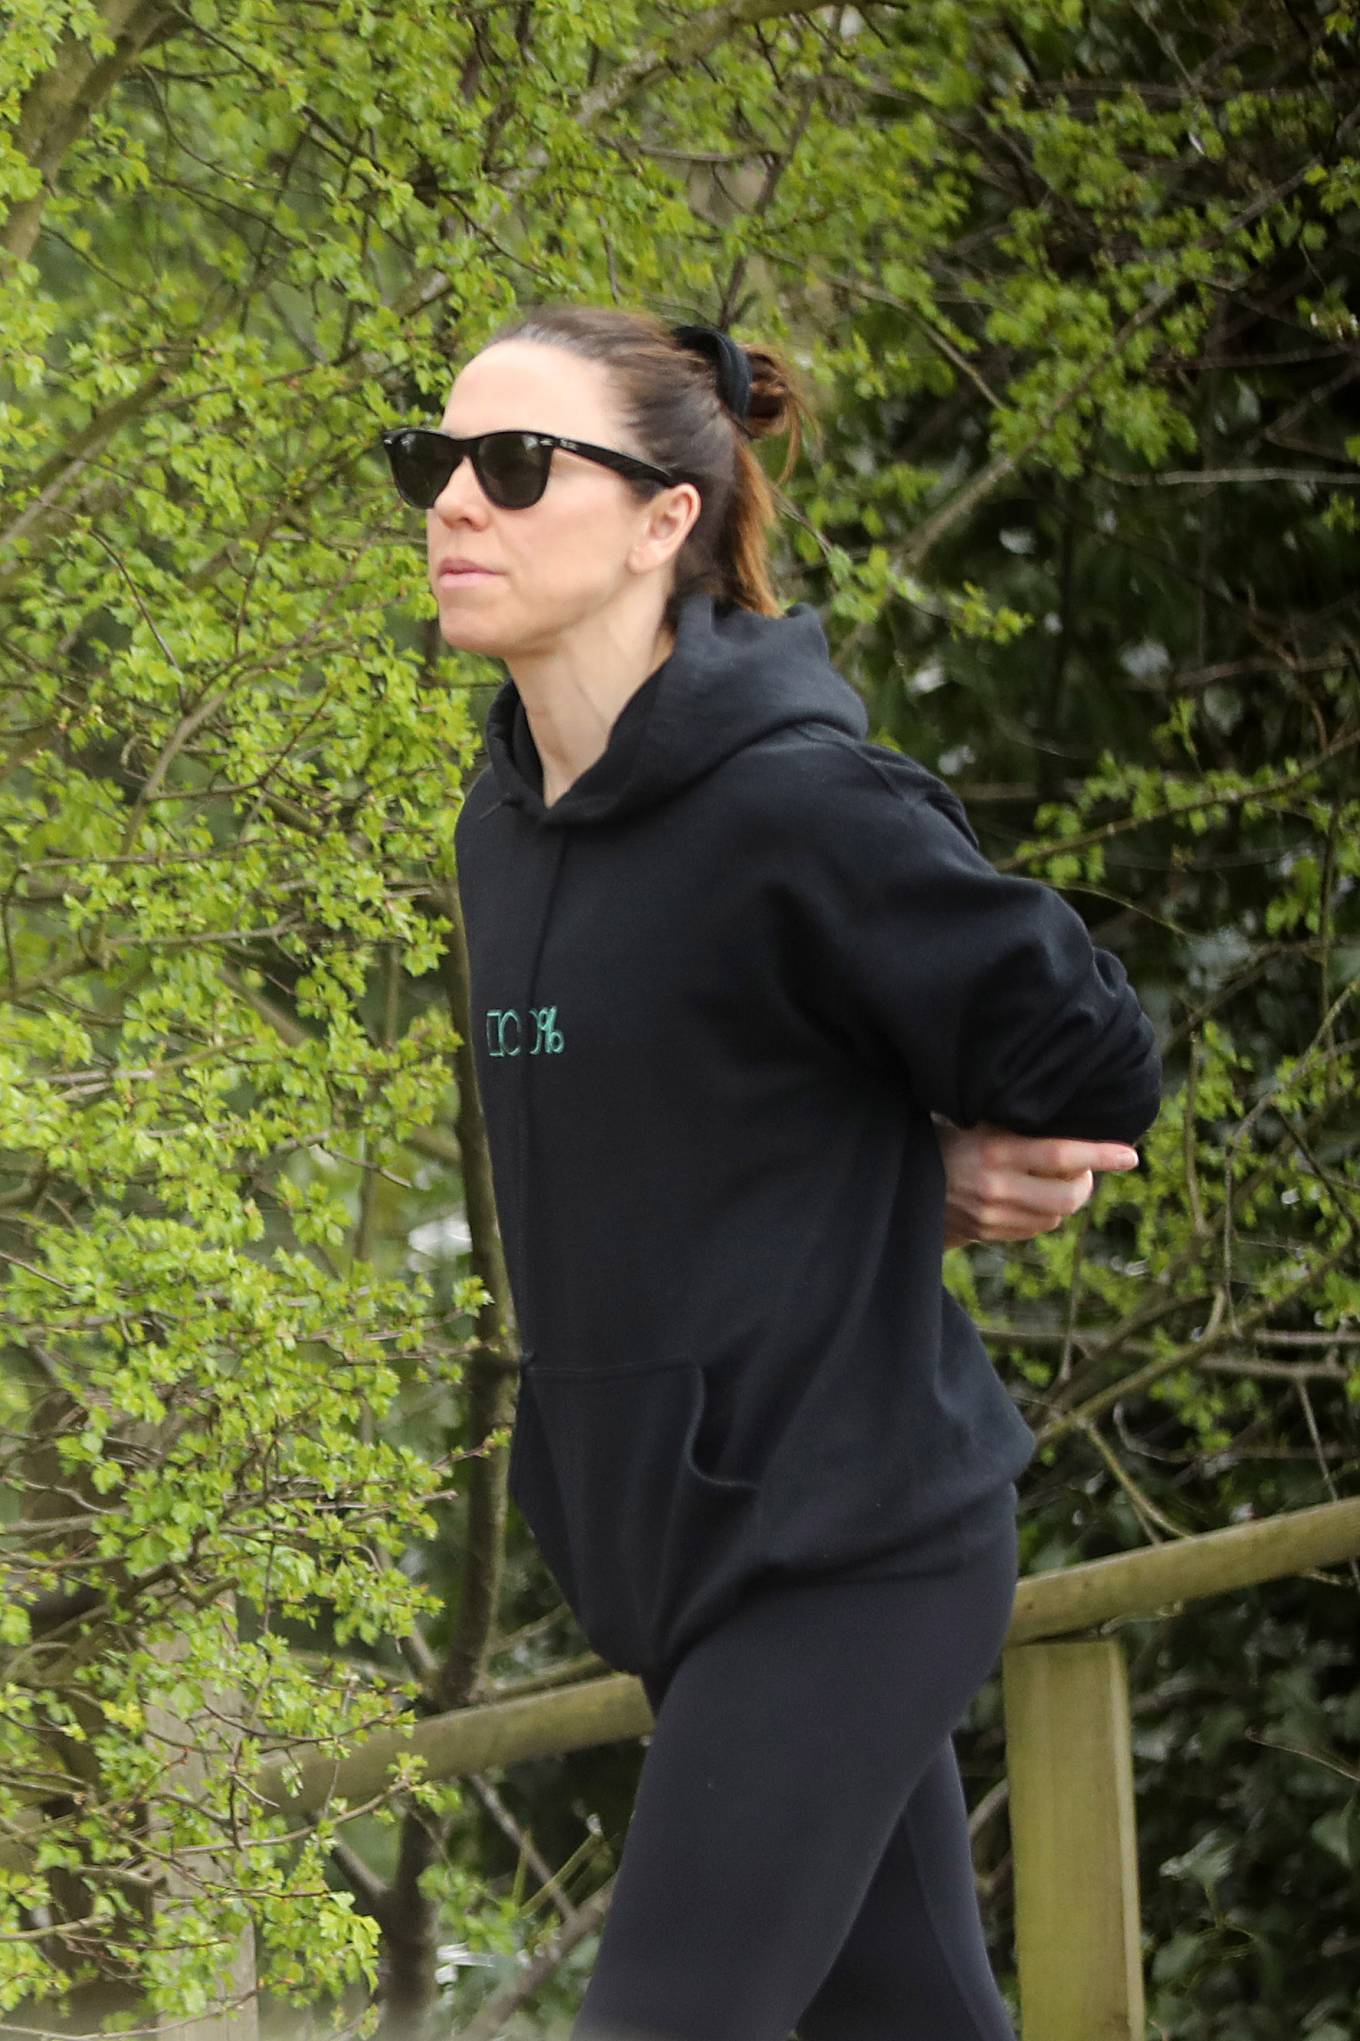 Melanie Chisholm â€“ Out for a walk in London